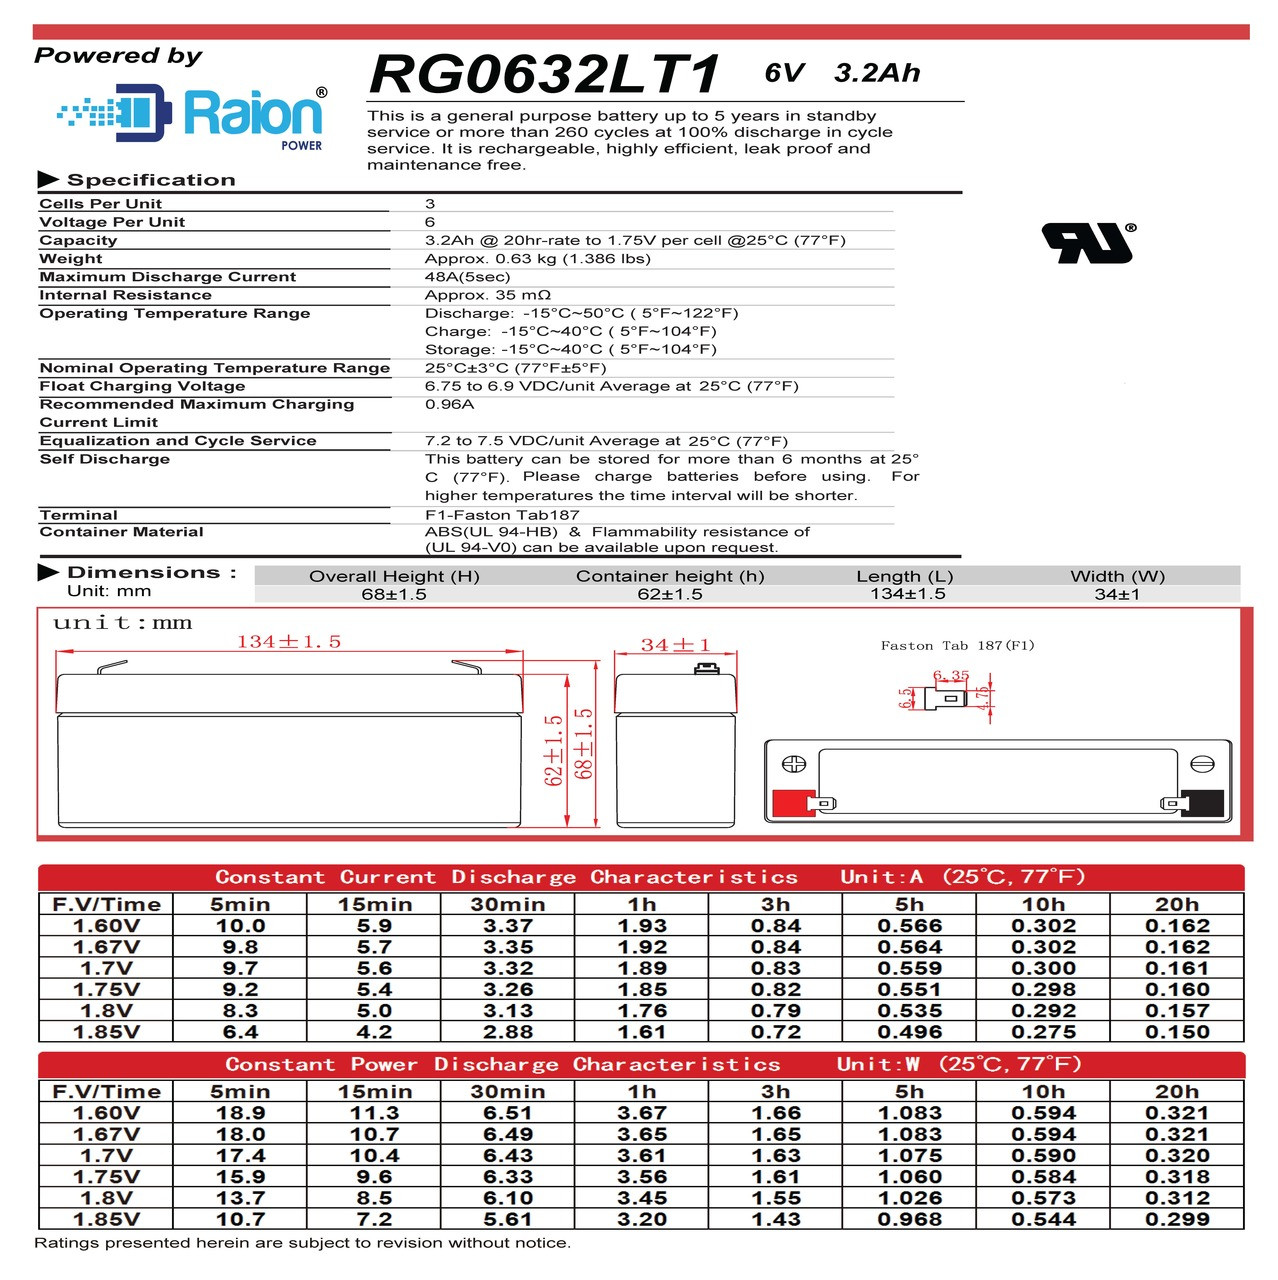 Raion Power RG0632LT1 6V 3.2Ah Battery Data Sheet for Ivac Medical Systems 580EE Infusion Pump